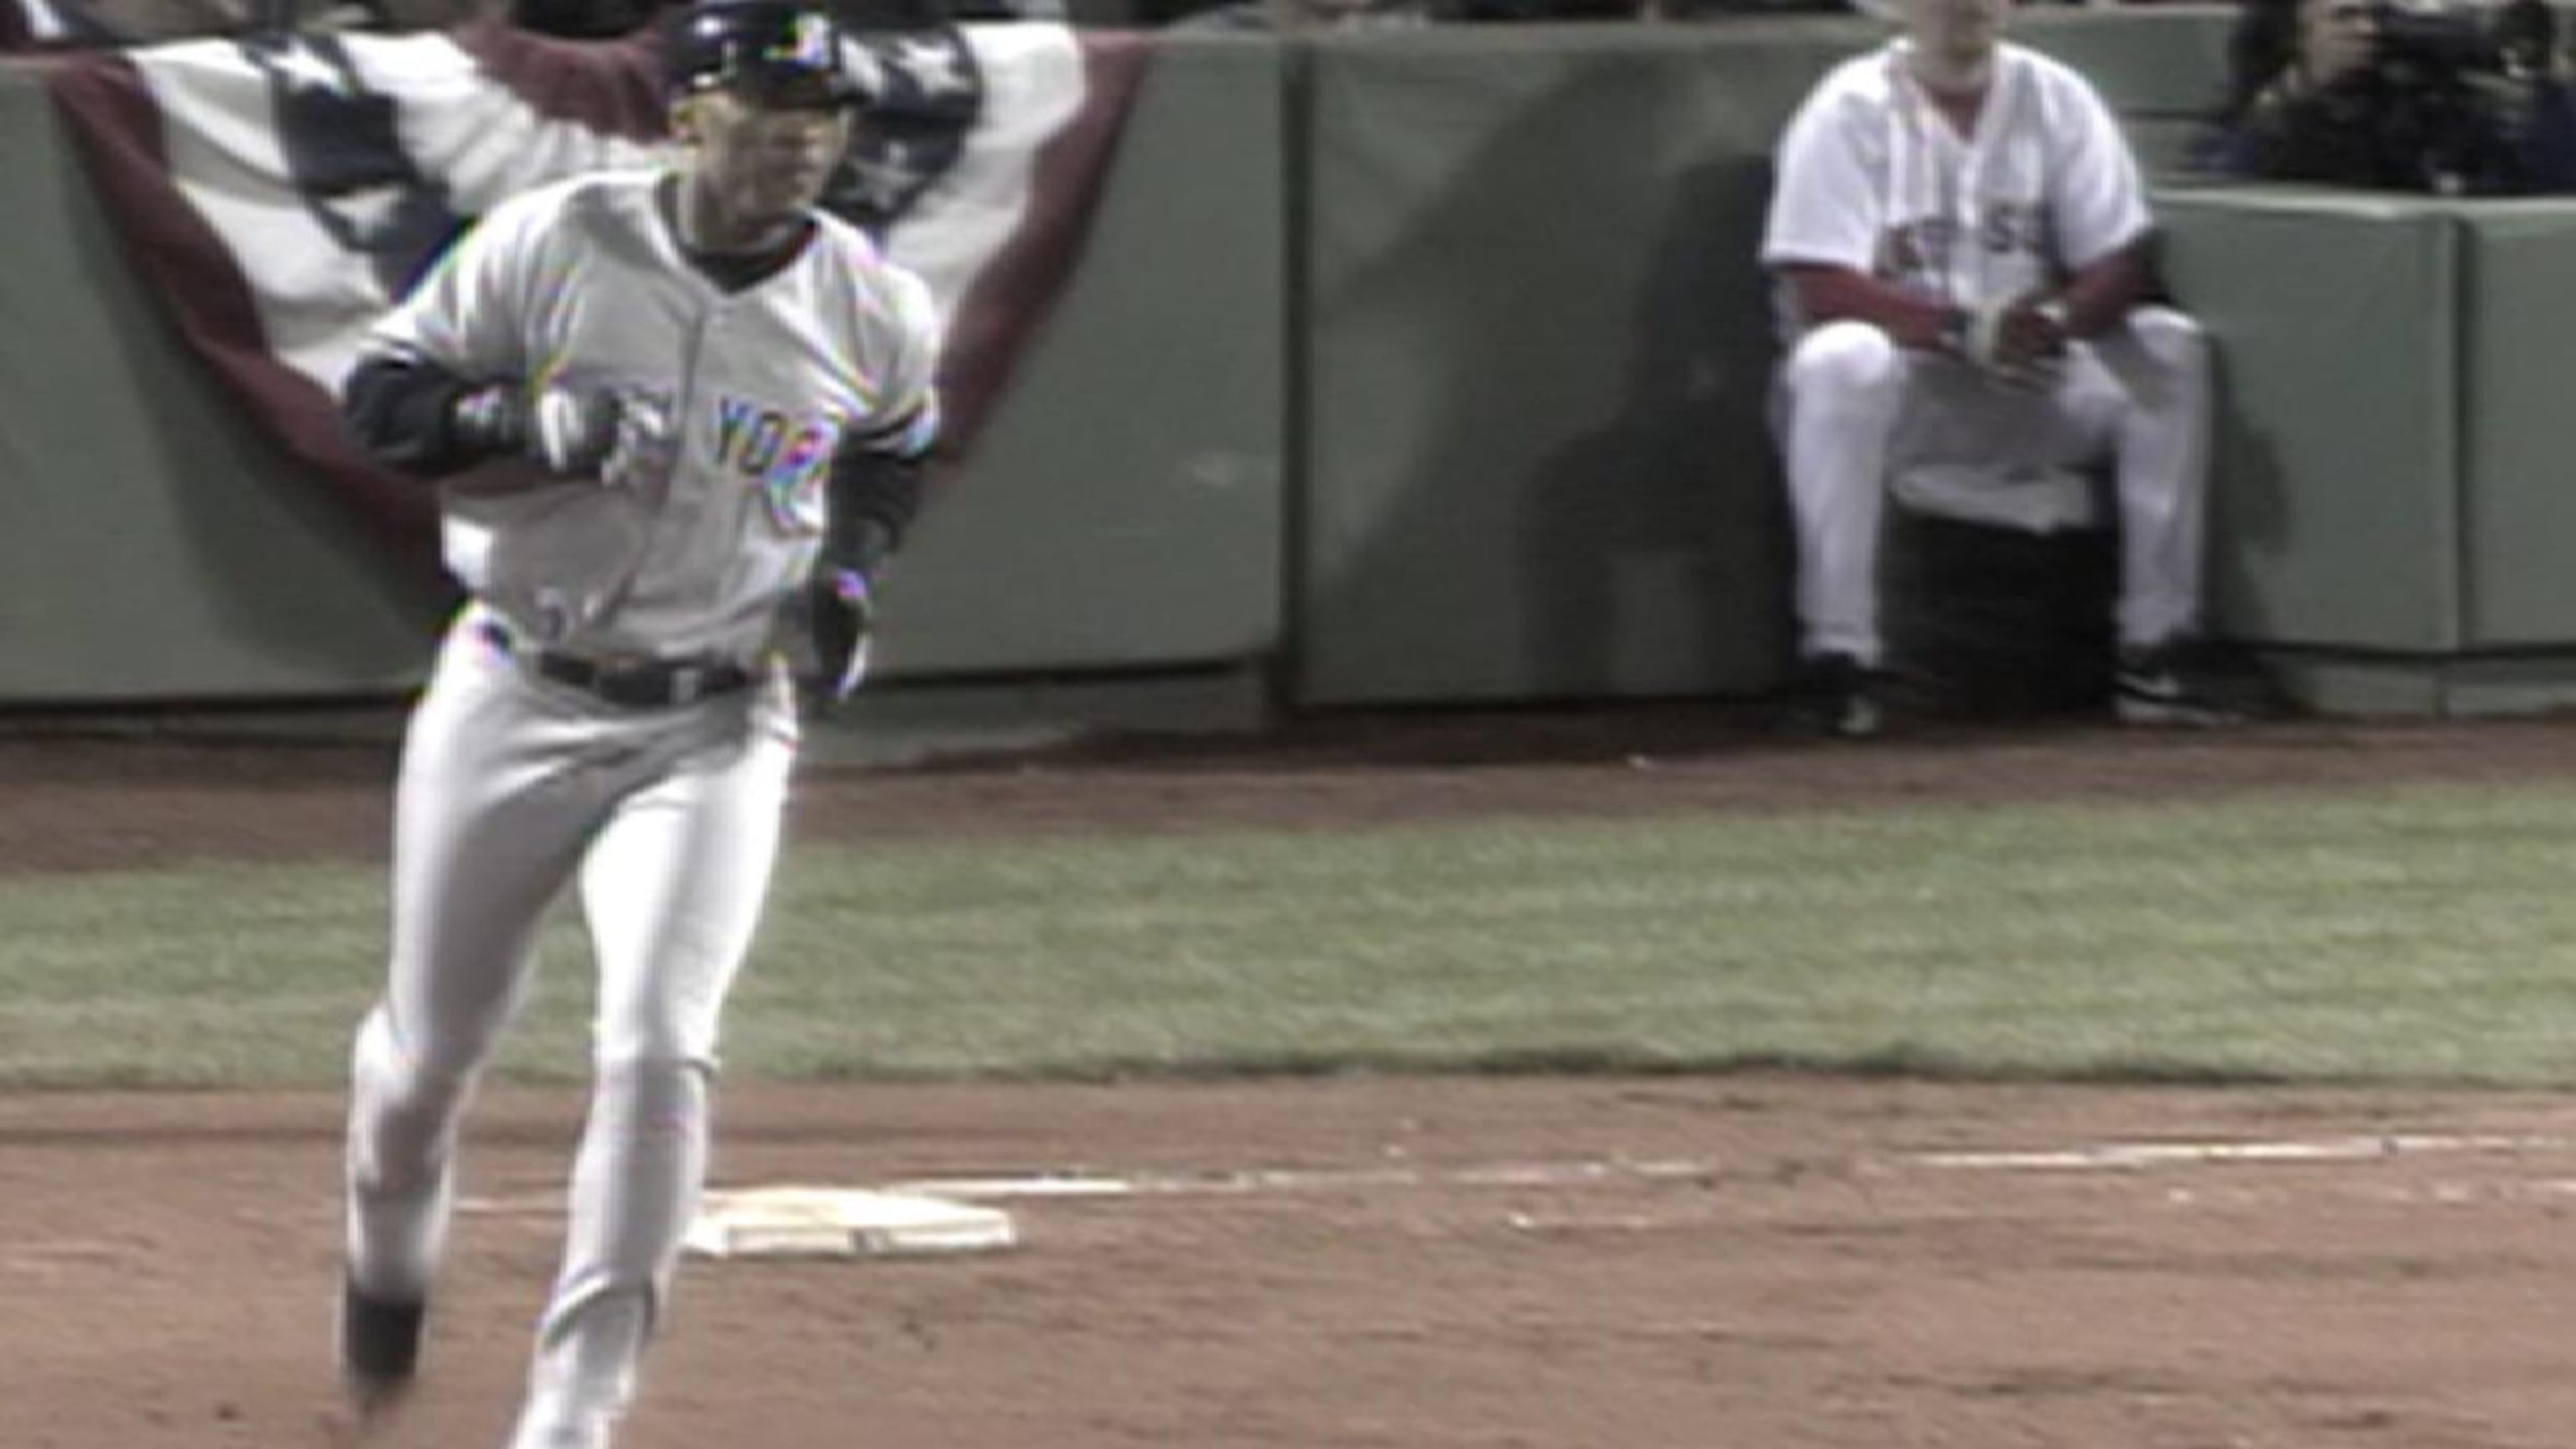 Top All-Time Marlins Moments: 2 Gary Sheffield home runs in same inning -  Fish Stripes